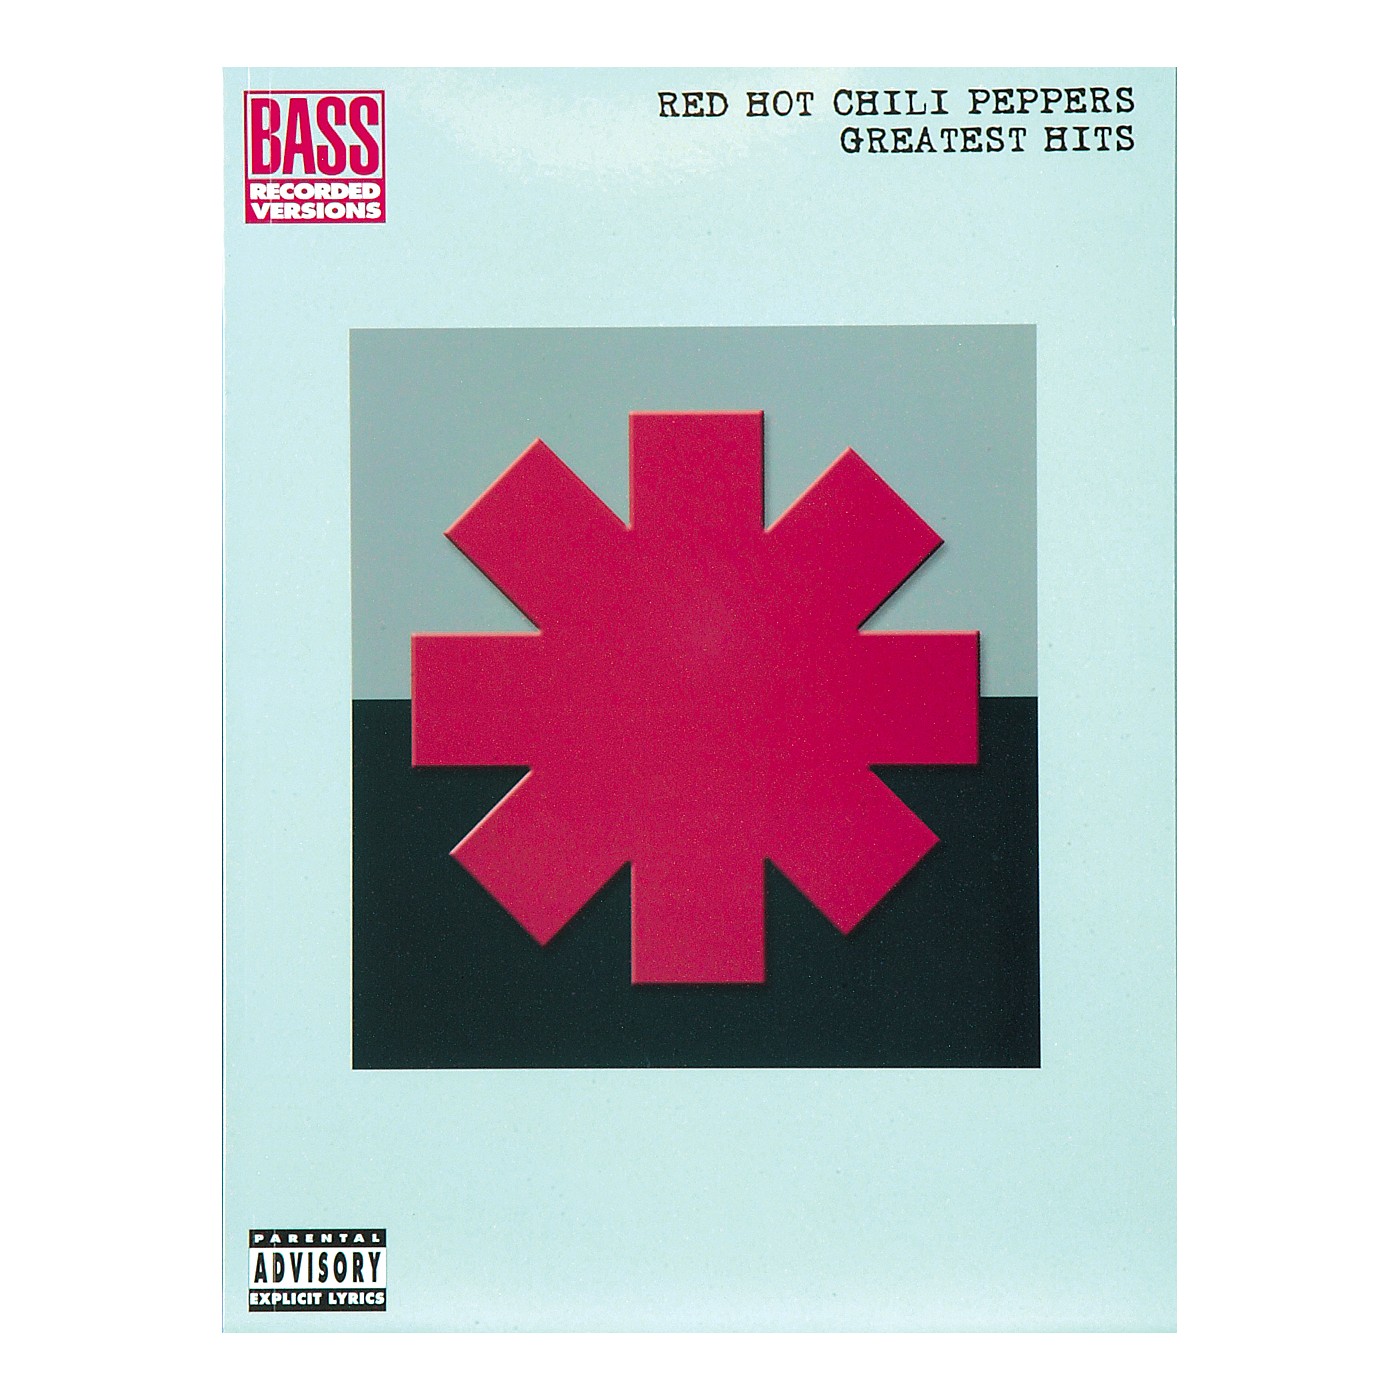 Hal Leonard Red Hot Chili Peppers Greatest Hits Bass Guitar Tab Songbook thumbnail